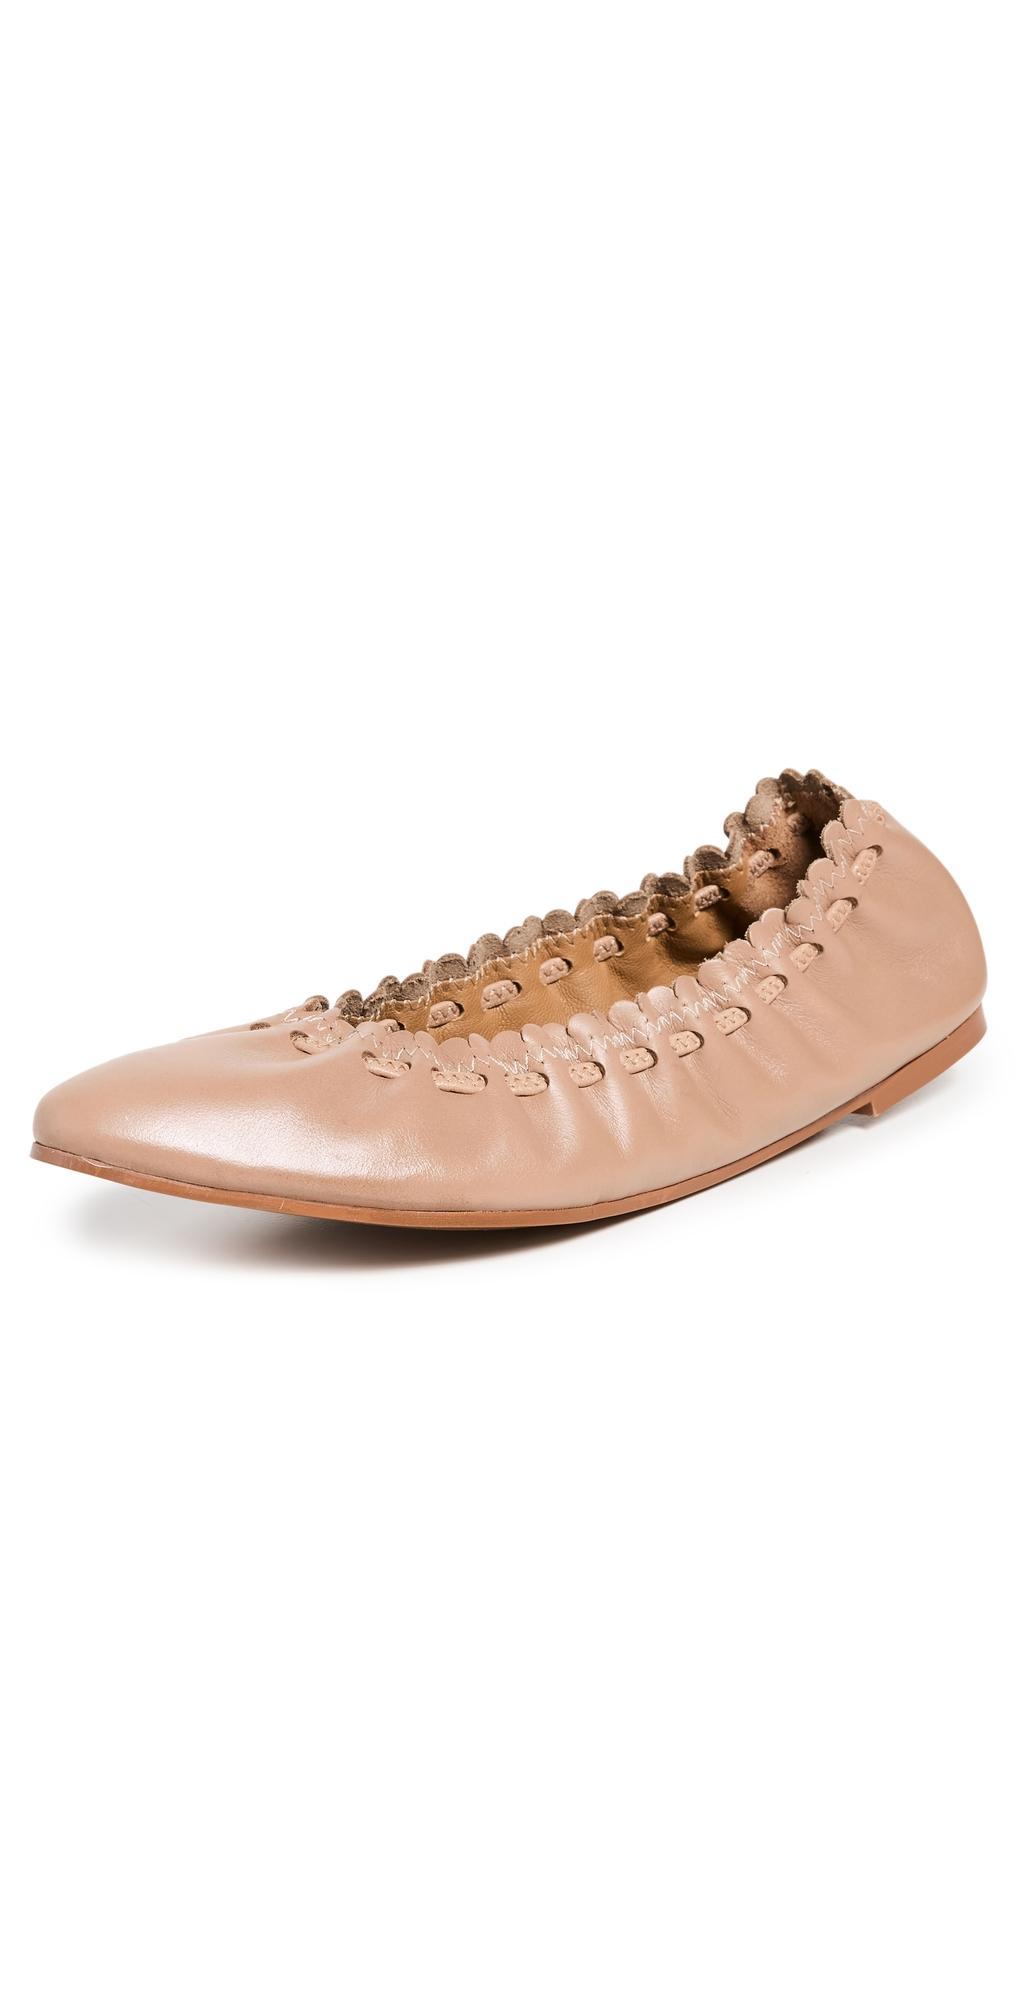 Womens Jane Scalloped Leather Ballet Flats Product Image